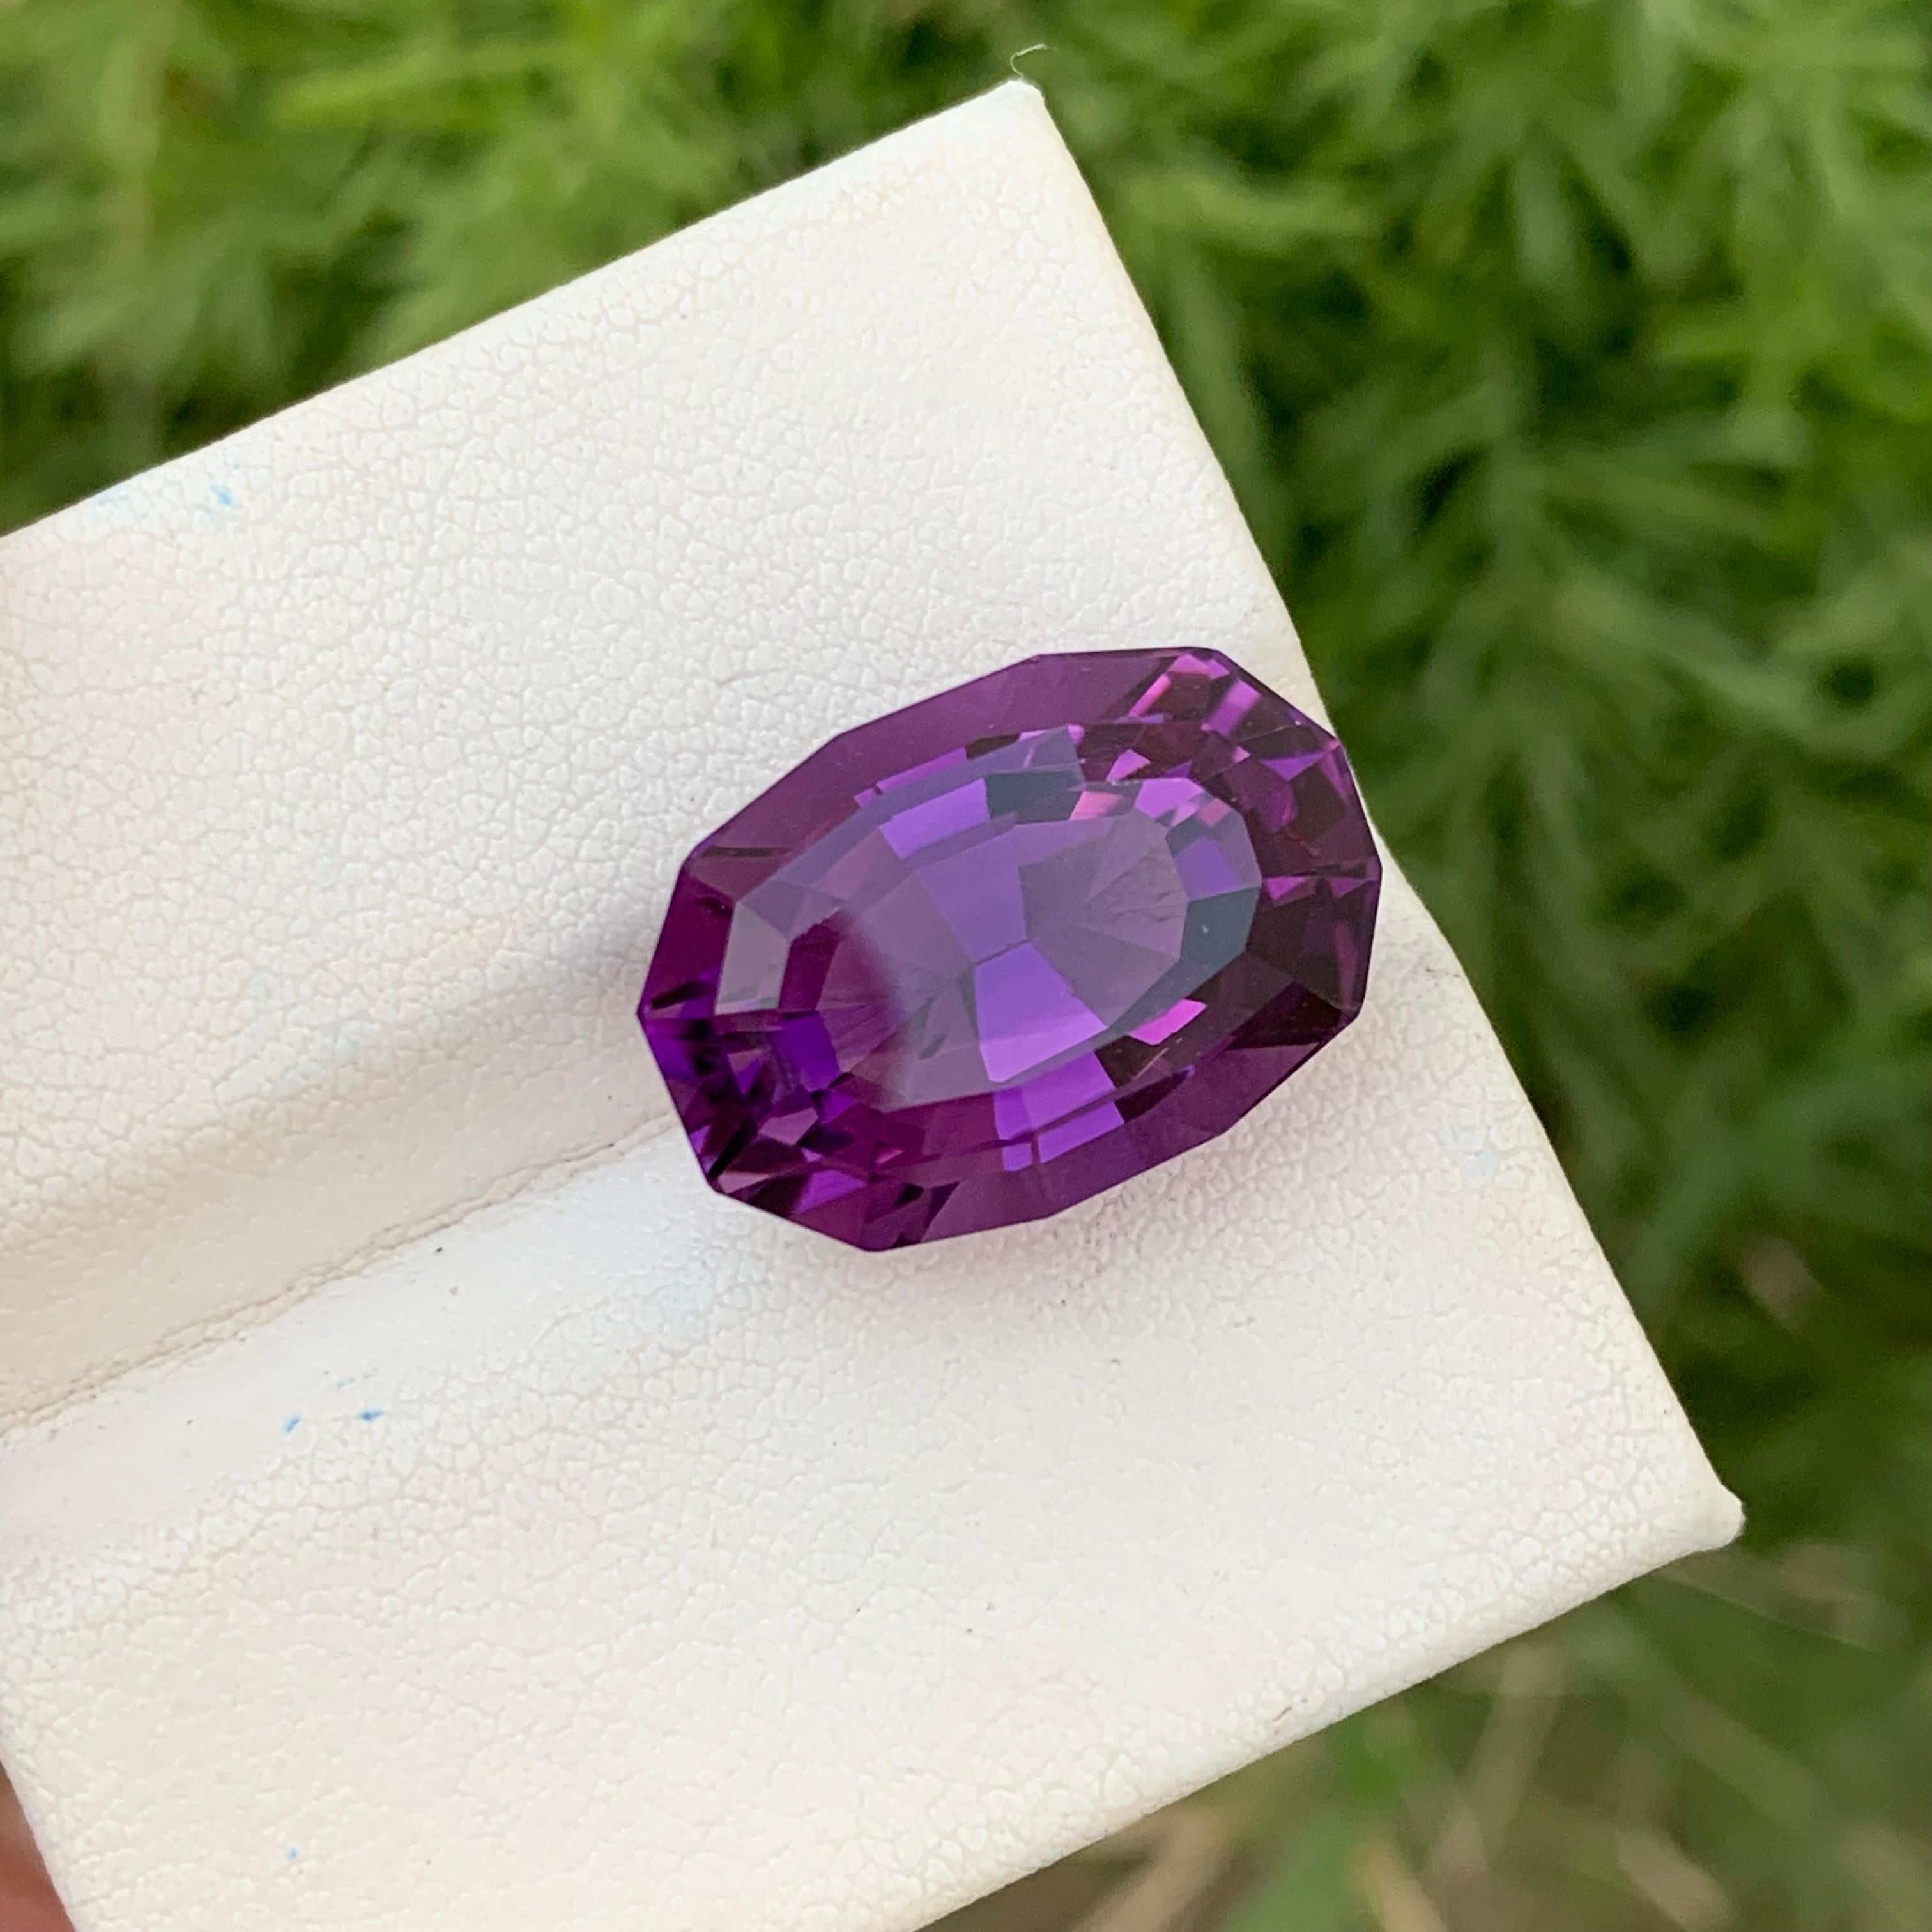 Loose Amethyst 
Weight: 15.80 Carats 
Dimension: 18.5x12.9x11.1 Mm
Origin: Brazil Mine
Shape: Dodecagon
Treatment: Nill
Certificate; On Demand 
Purple amethyst, a member of the quartz family, is a captivating gemstone admired for its rich violet